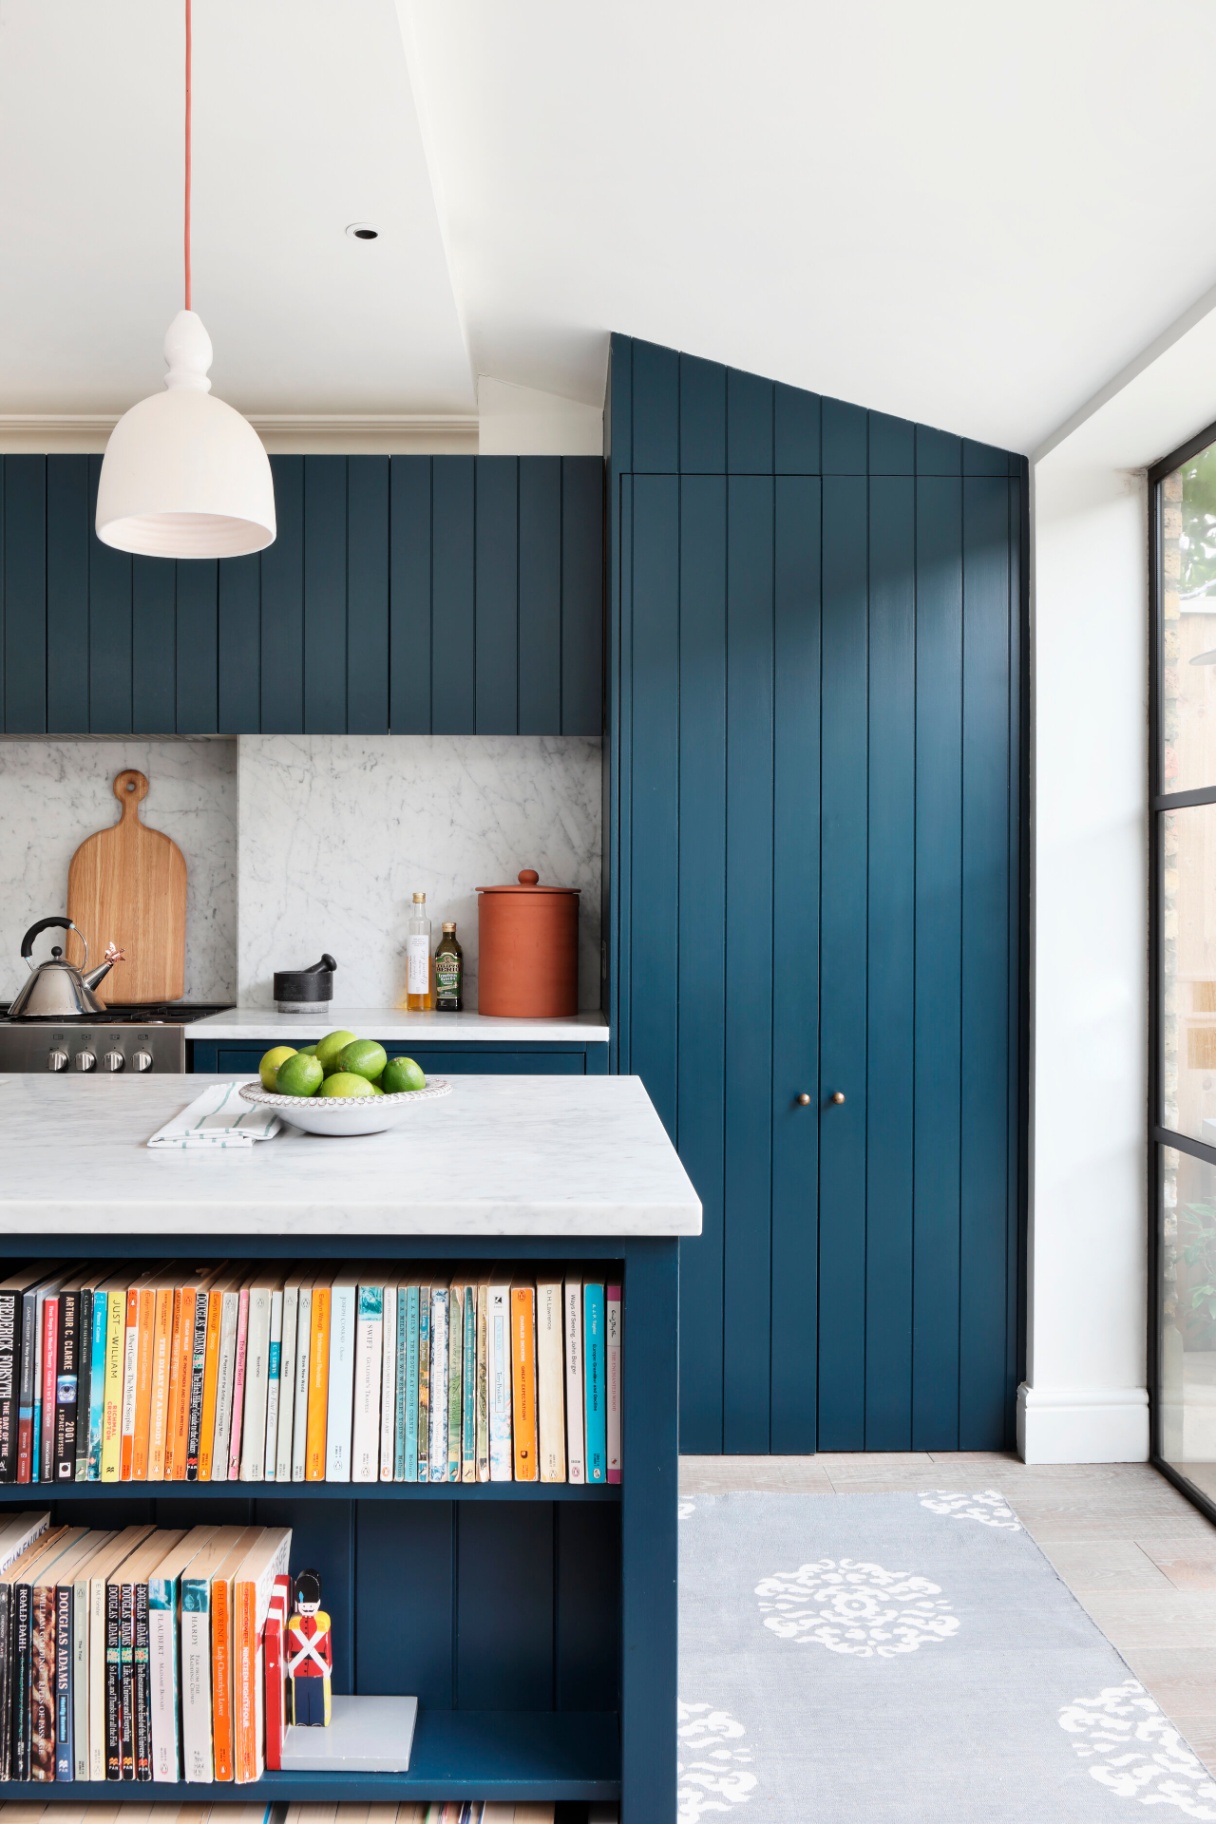 Discover 20 Beautiful Kitchens And Get Inspired